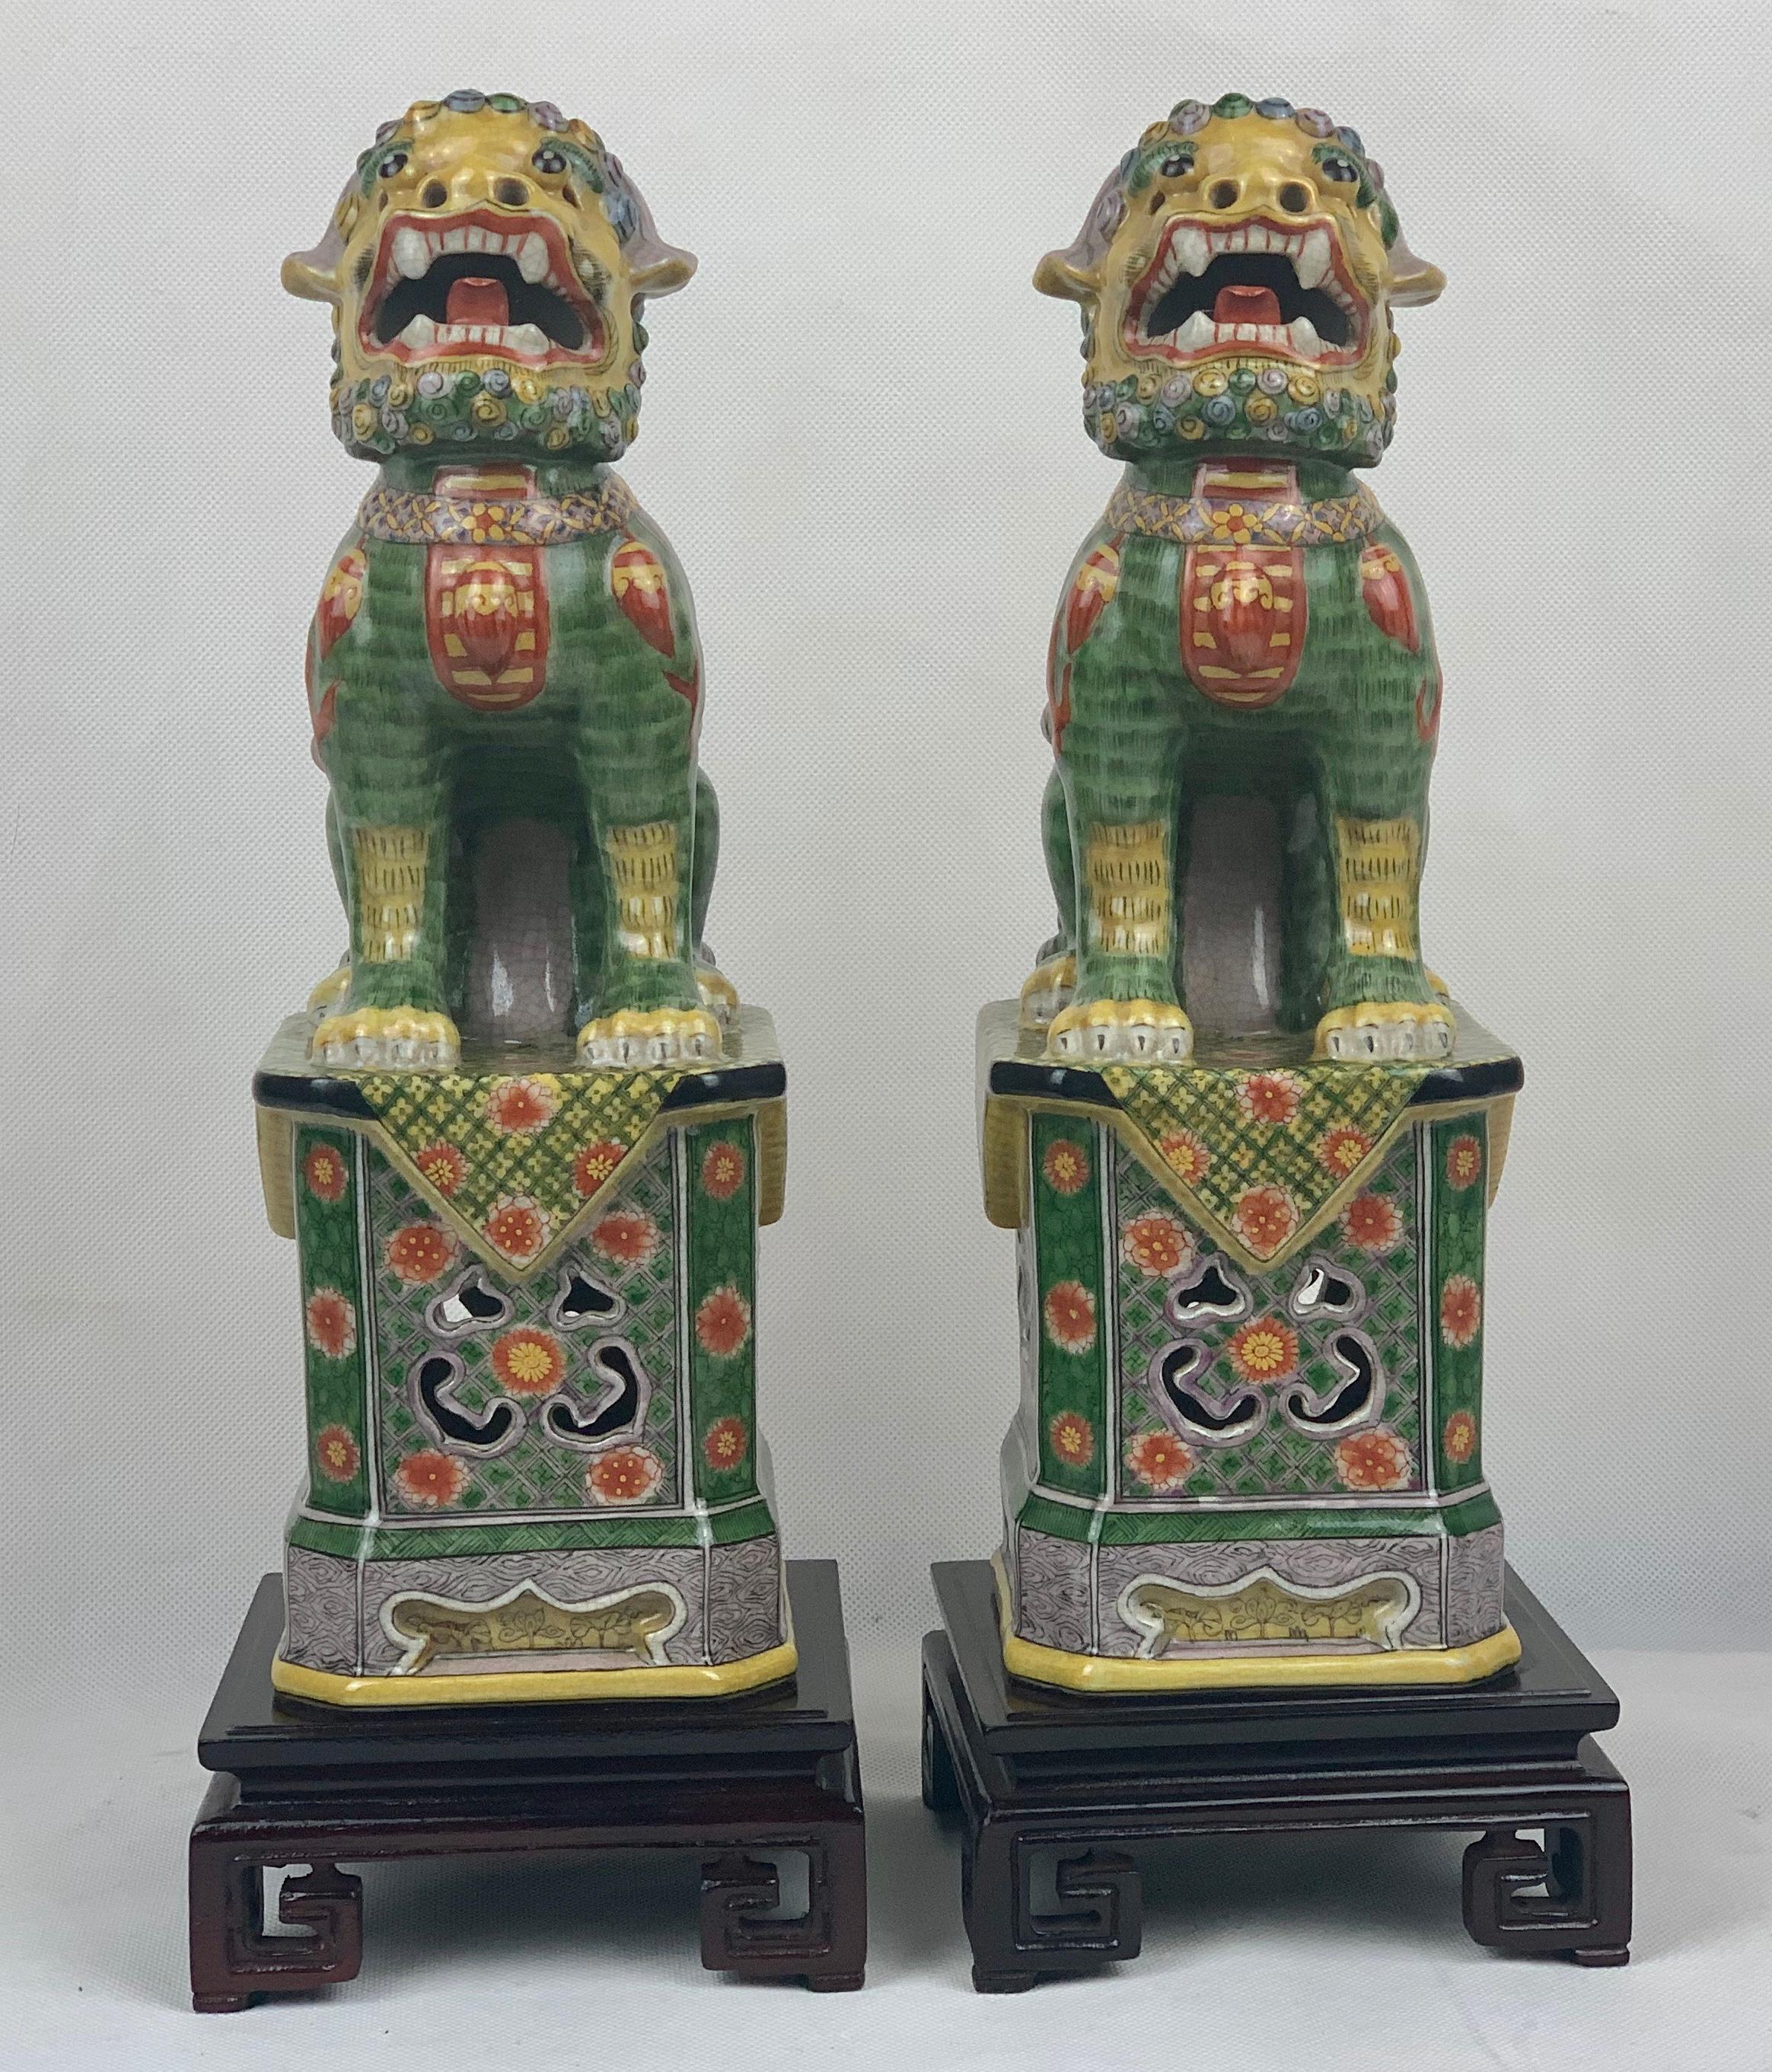 Pair of Chinese polychromed porcelain Foo Dogs or Foo Lions on stands. Their front legs are separated from their bodies as if they are about to roar at approaching visitors. They are finely modeled and hand decorated in shades of Ming Green,